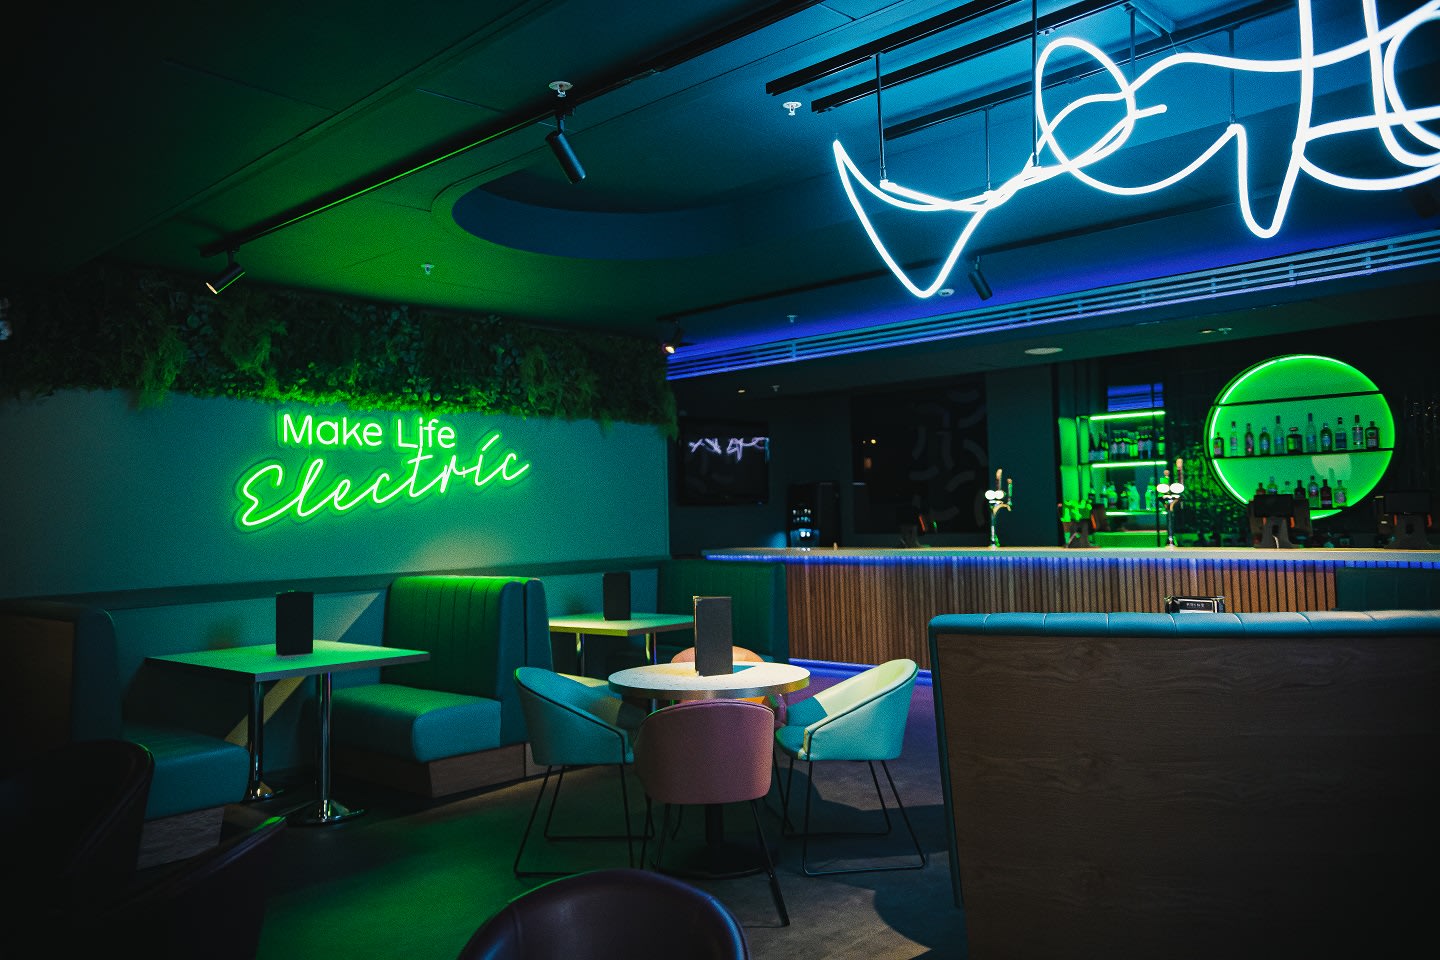 Electric Lounge at AO Arena